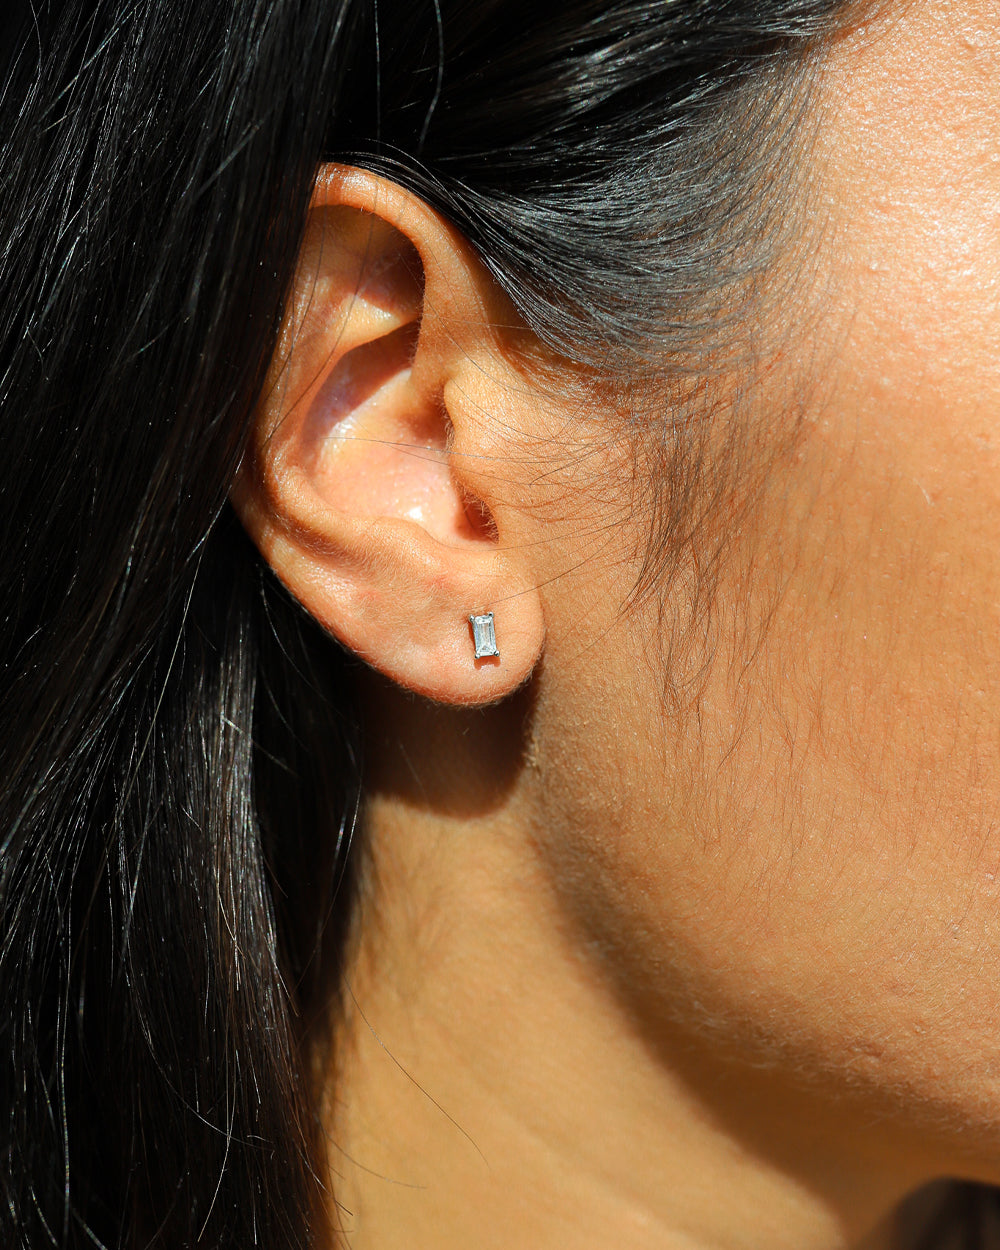 BAGUETTE STUDS. 925. - WHITE GOLD